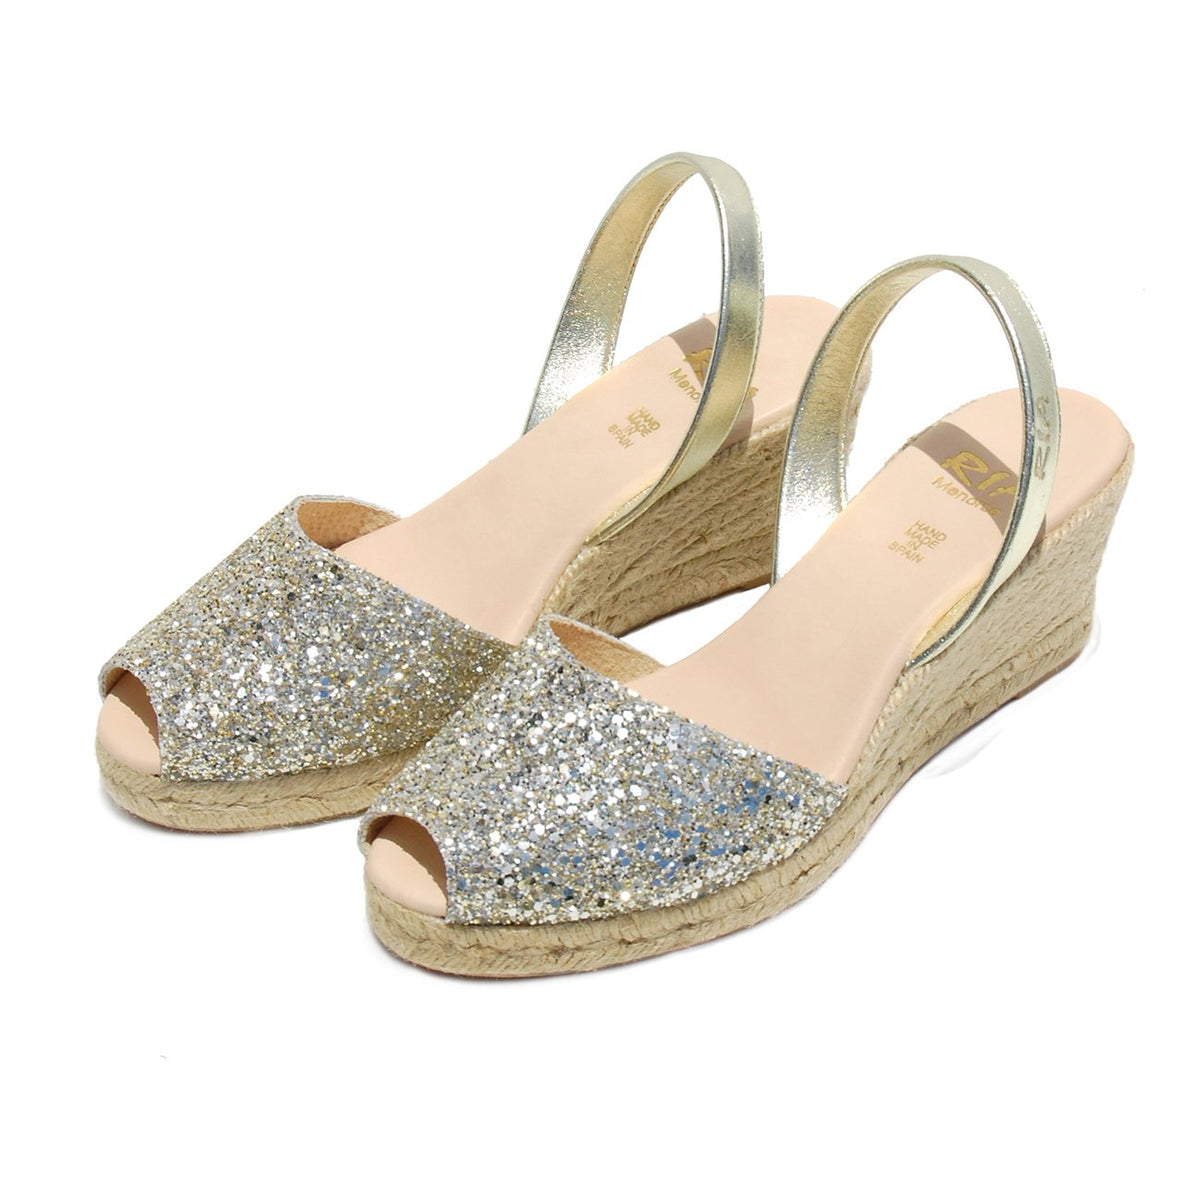 Parallel Culture Shoes and Fashion Online WEDGES RIA MENORCA LLUNA GLITTER WEDGE